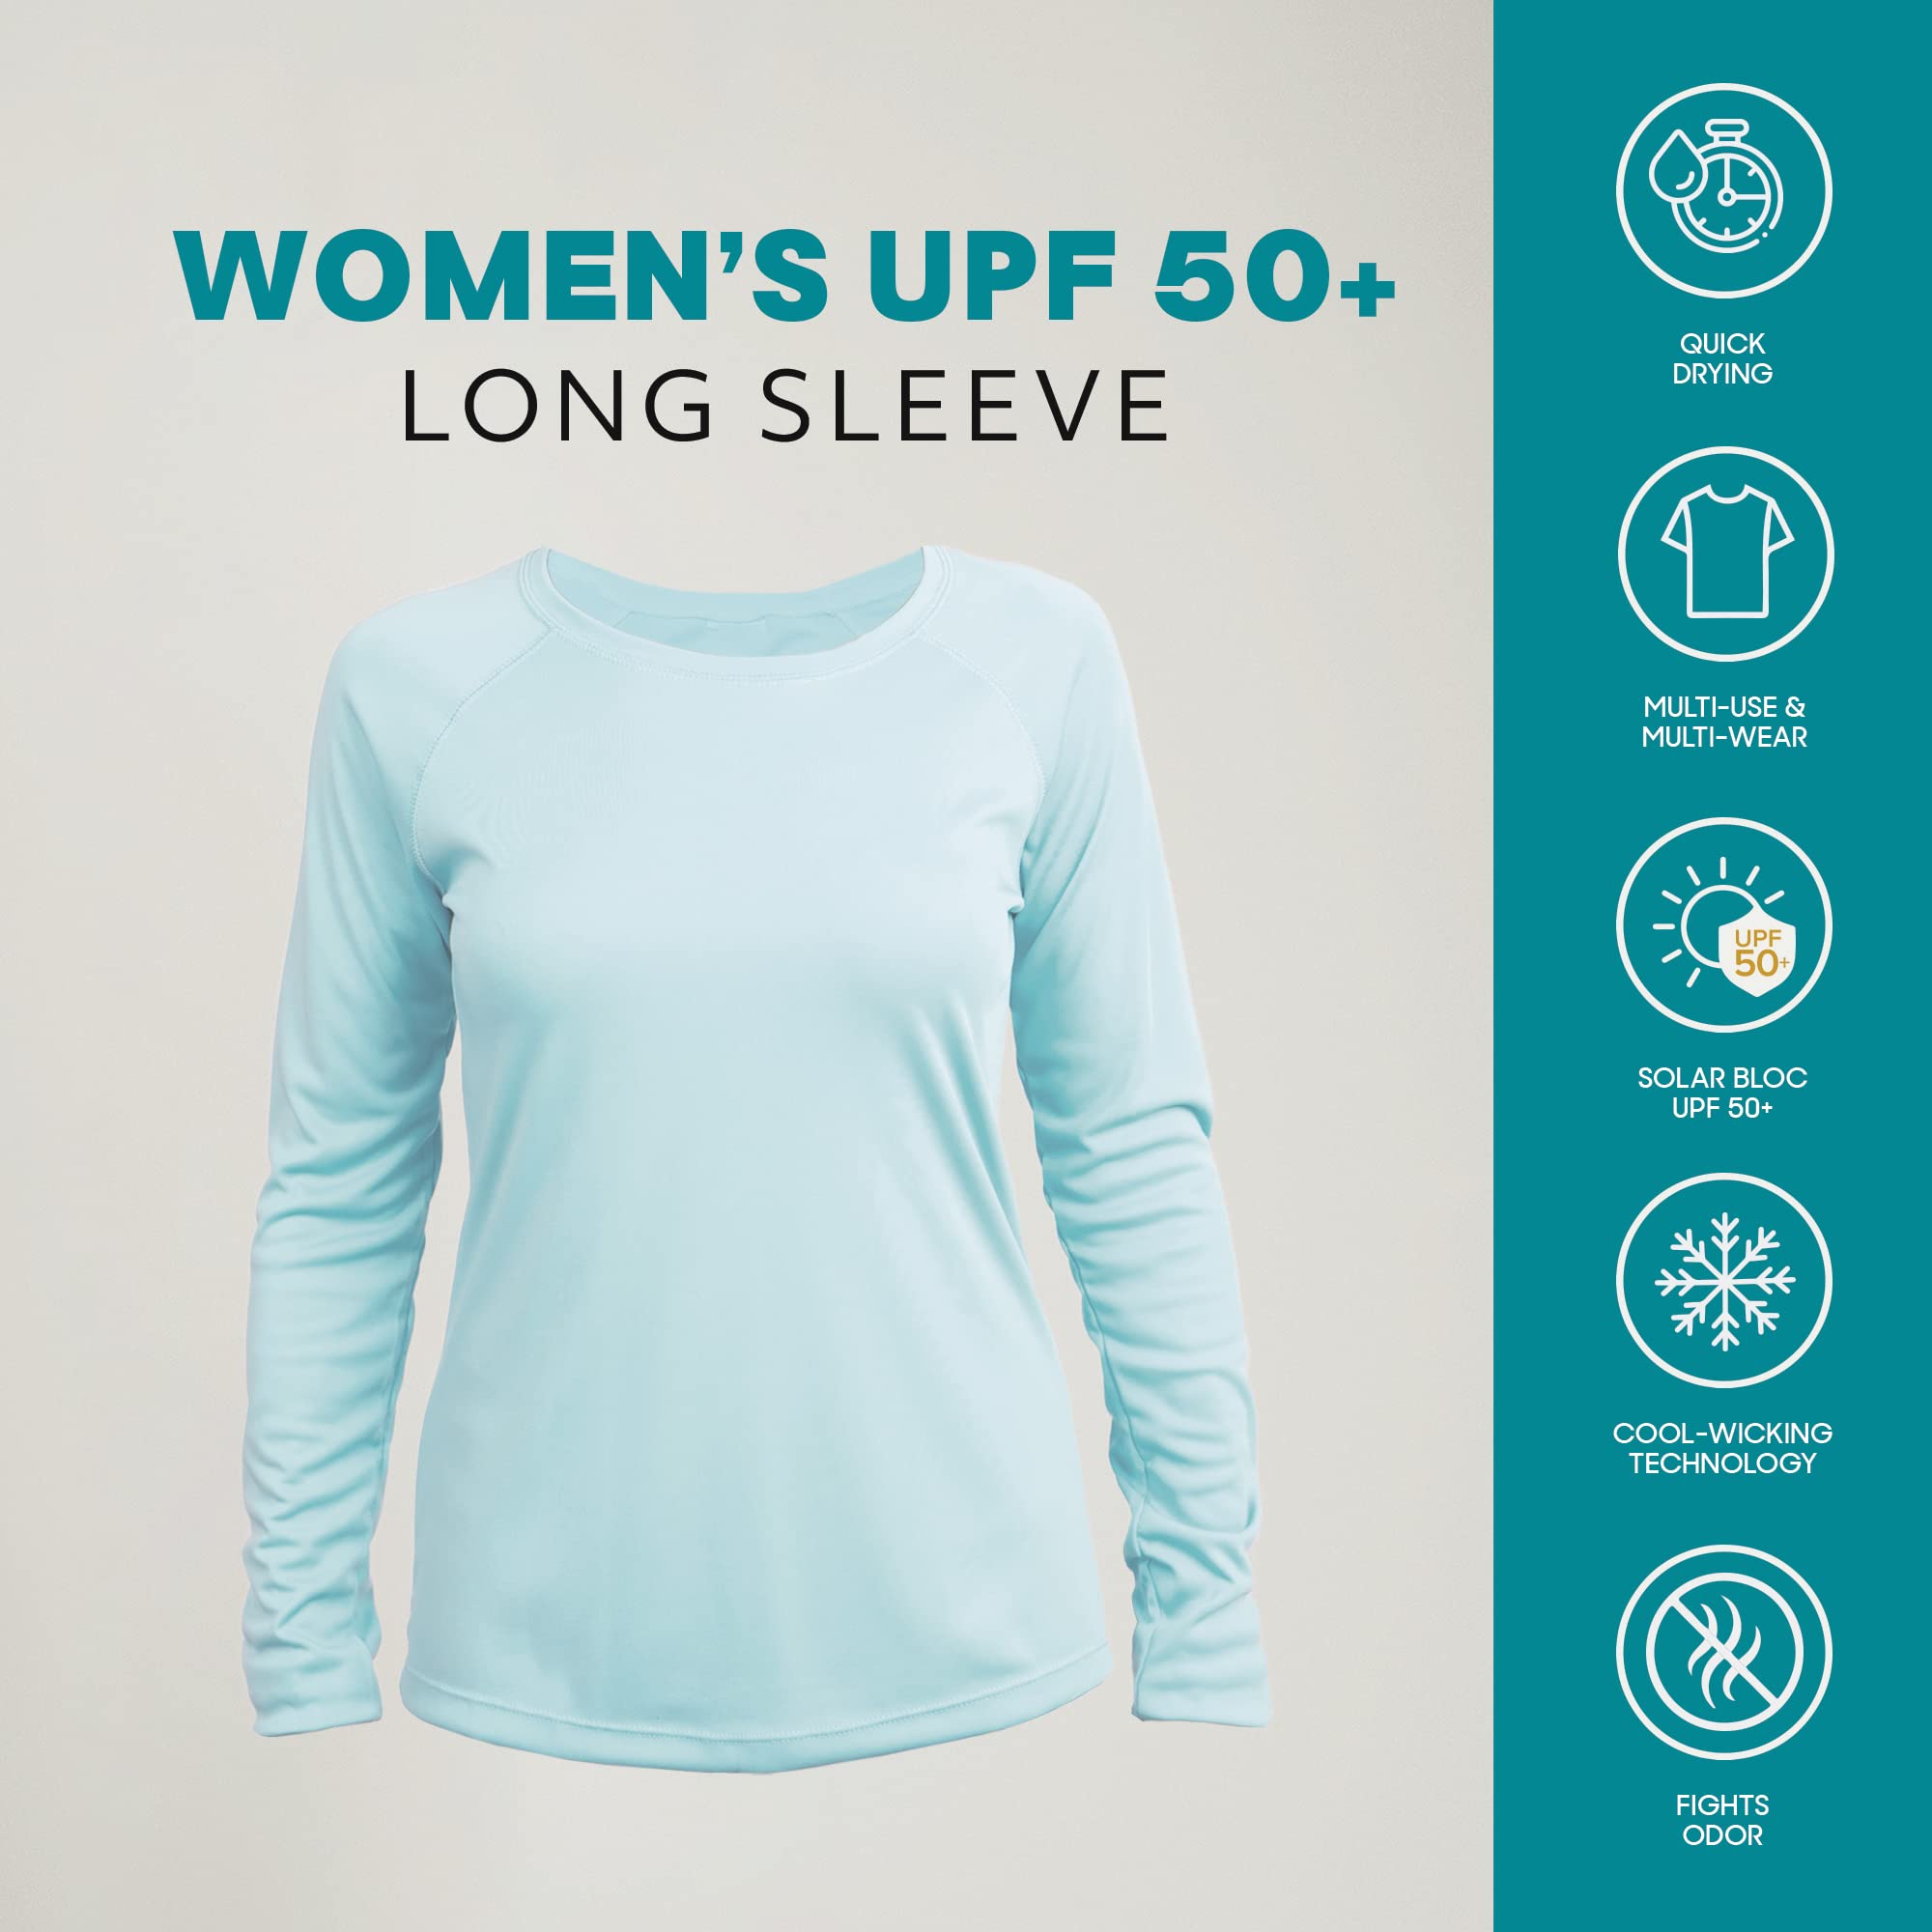 Vapor Apparel Women’s UPF 50+ UV Sun Protection Long Sleeve Performance Regular Fit T-Shirt for Sports and Outdoor